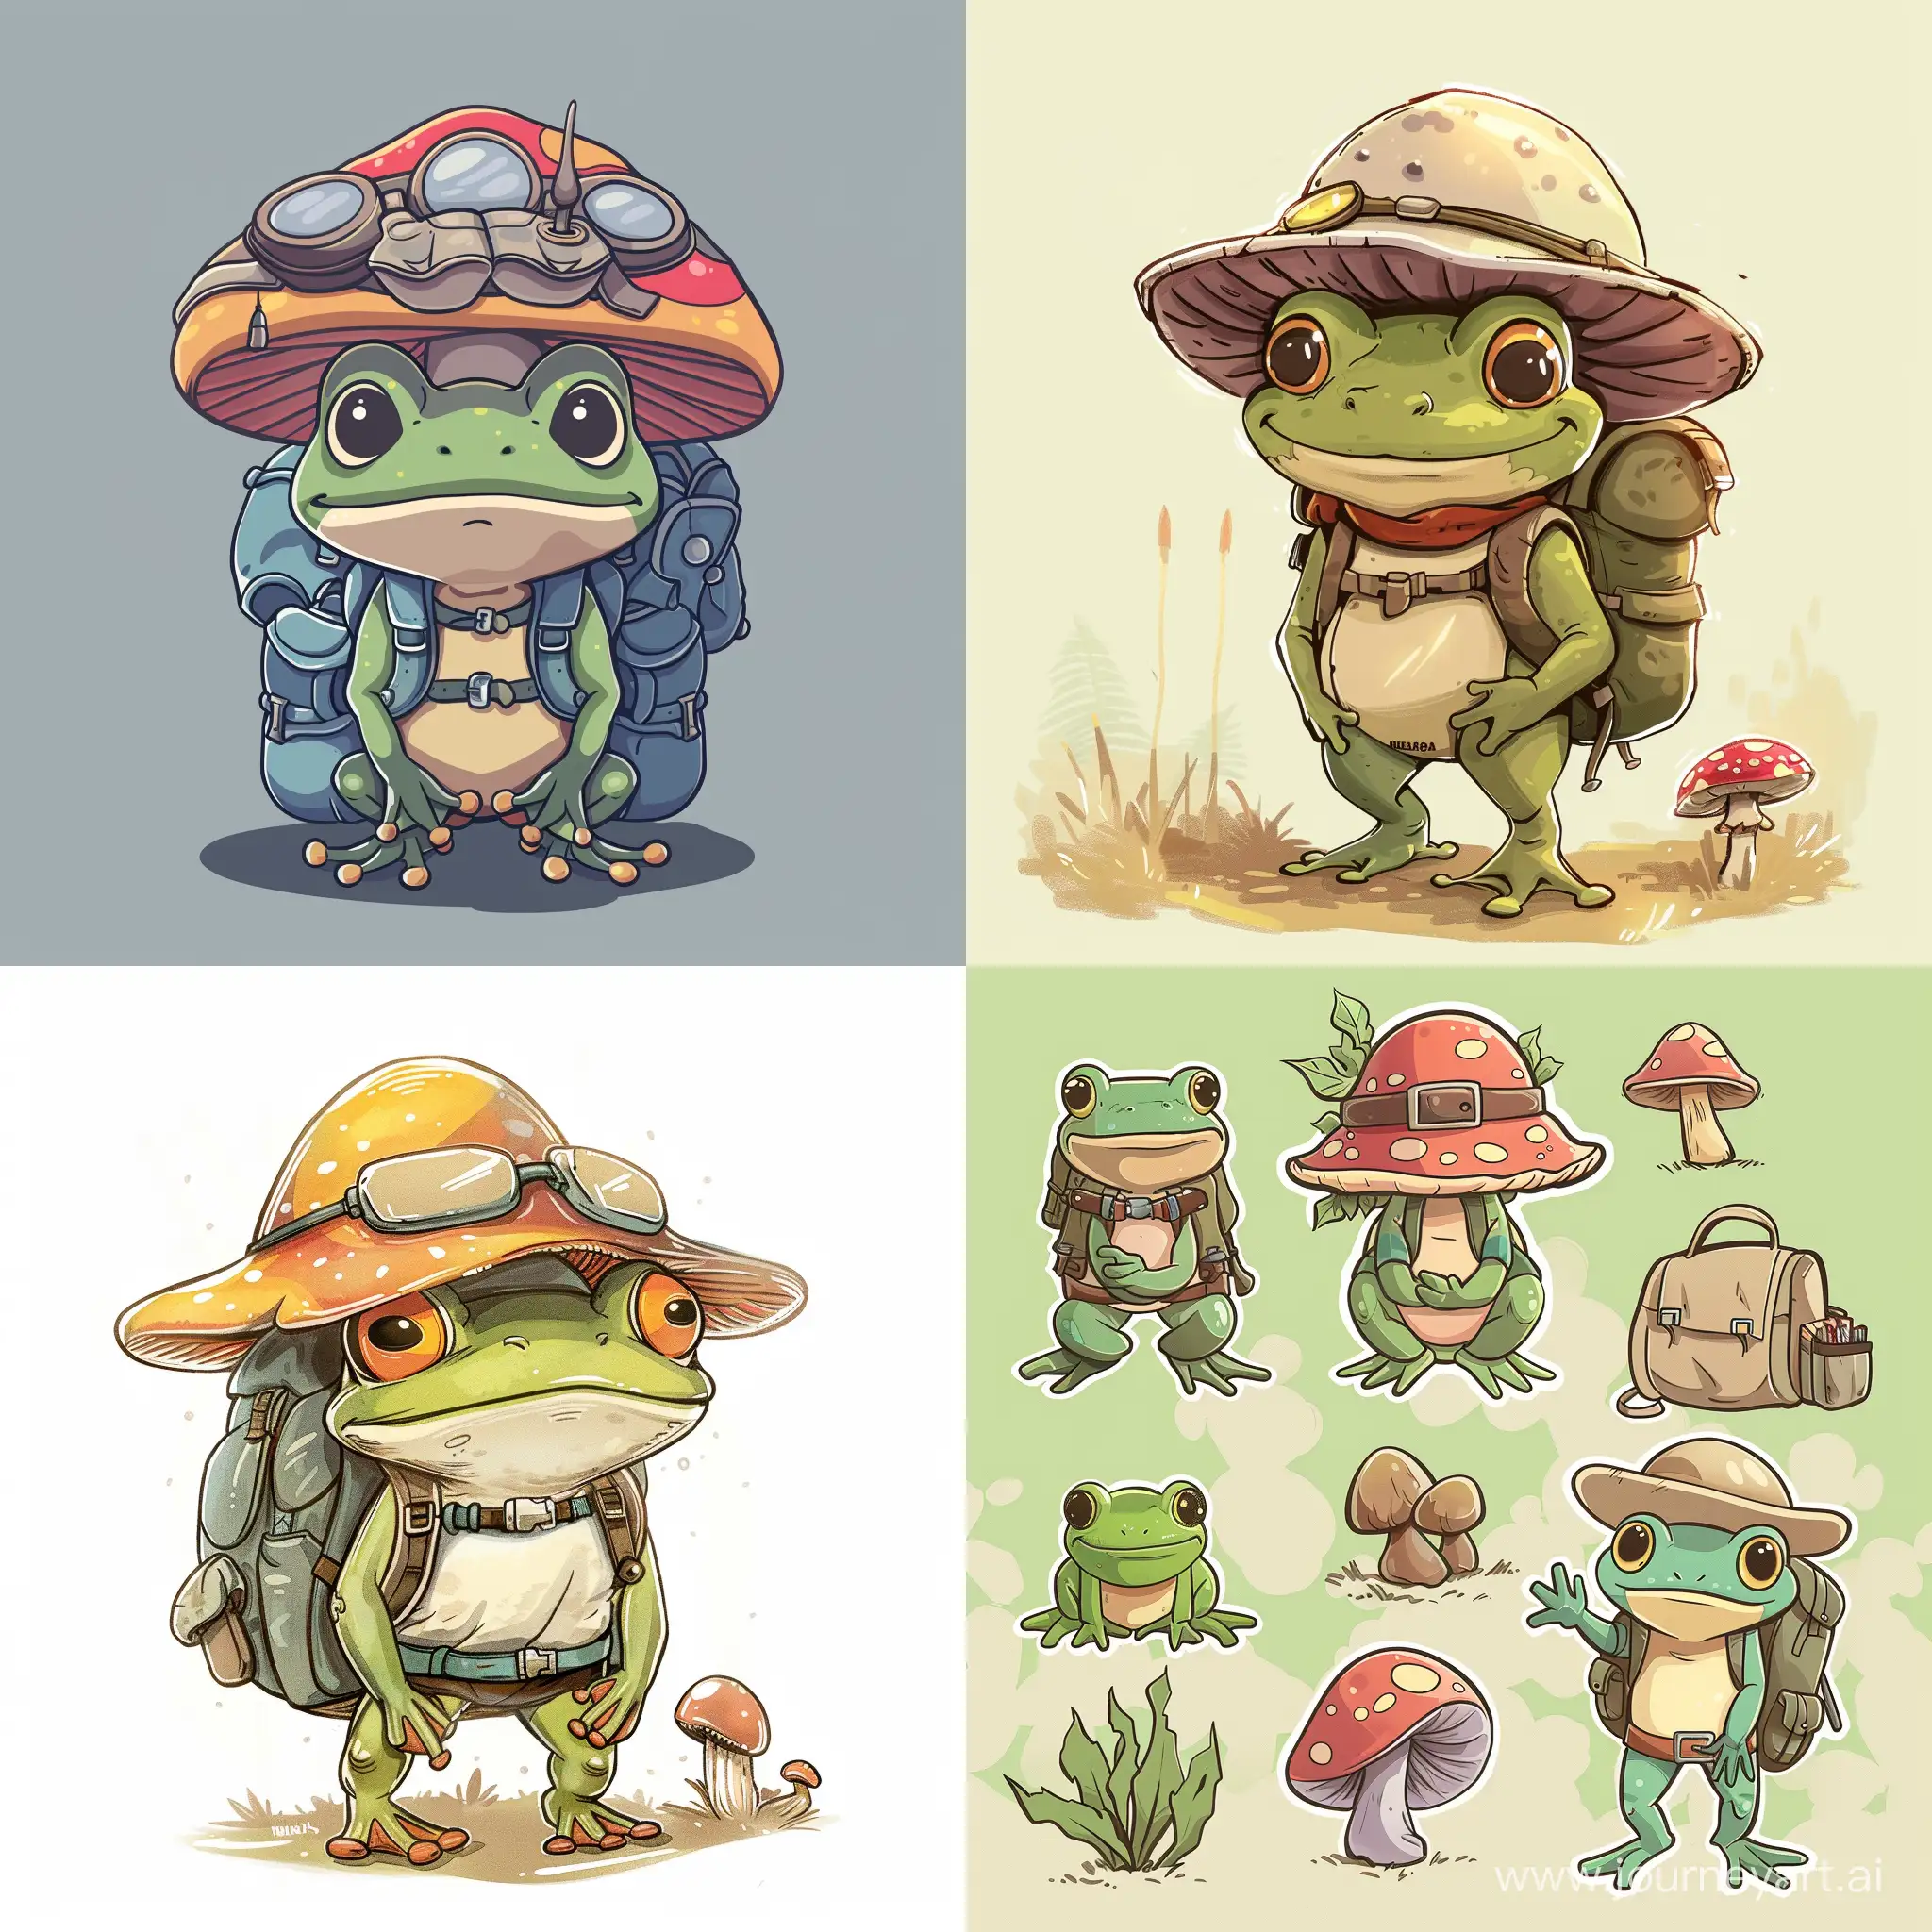 frog character, adventure gear, hat from a shroom,  draw in cute style 